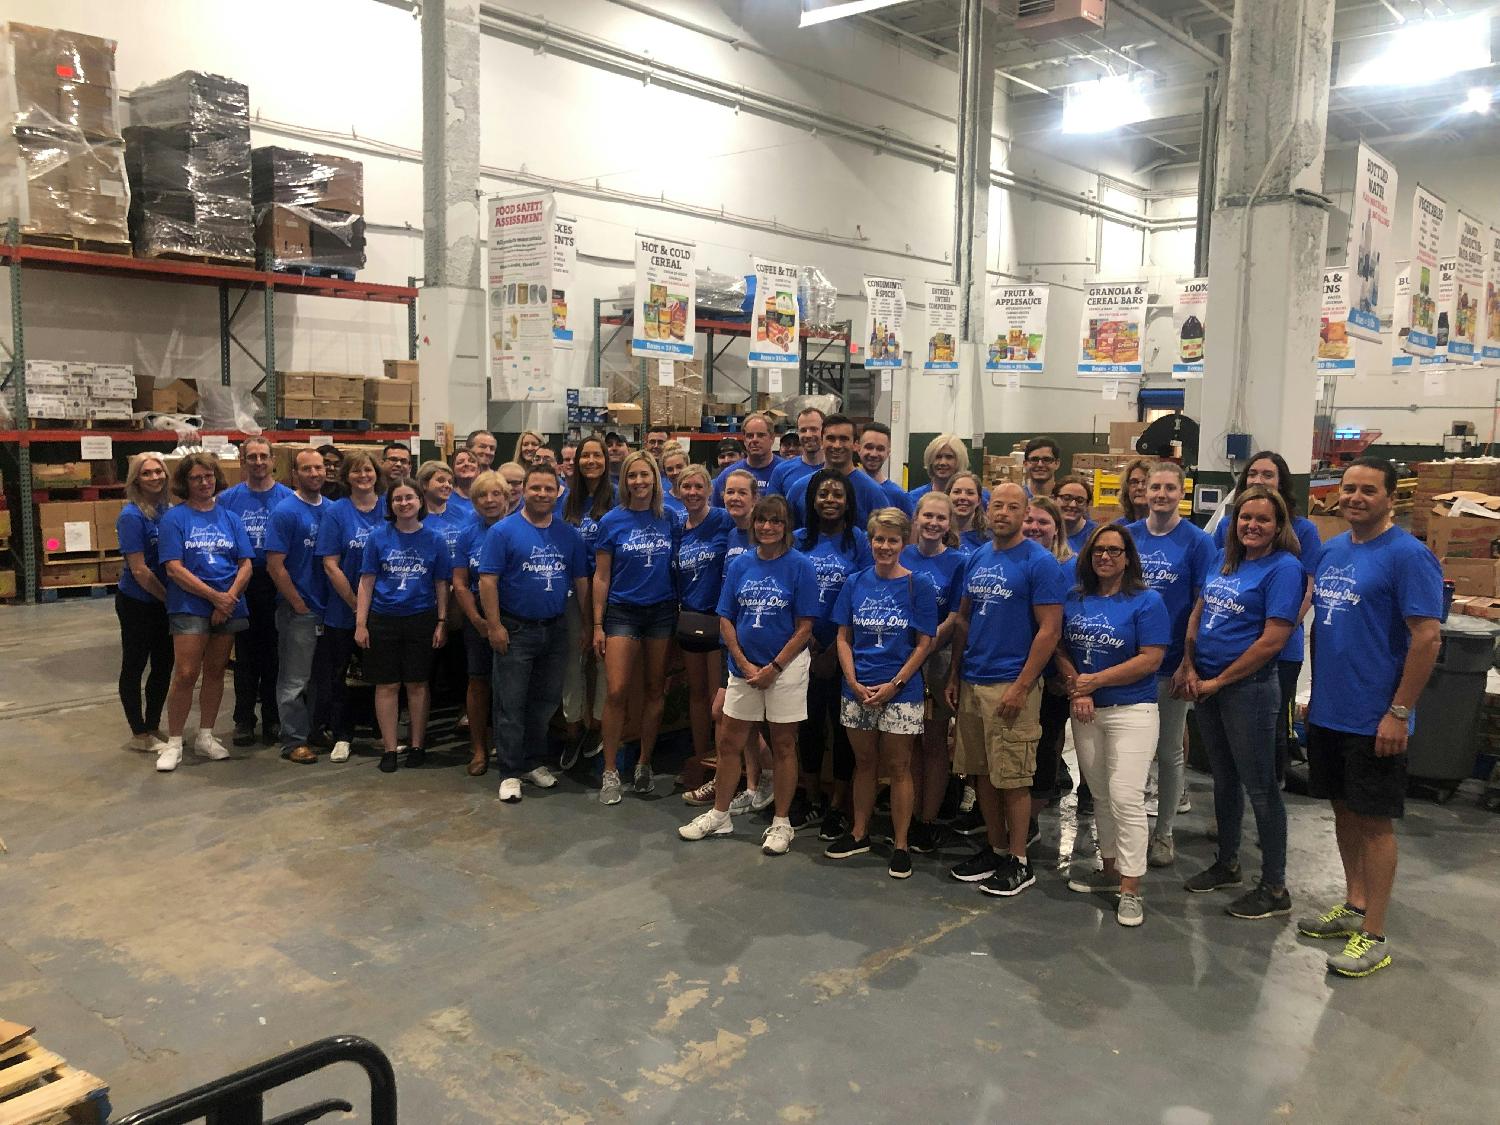 Purpose Day 2019: Volunteering at Foodlink - Rochester, NY 